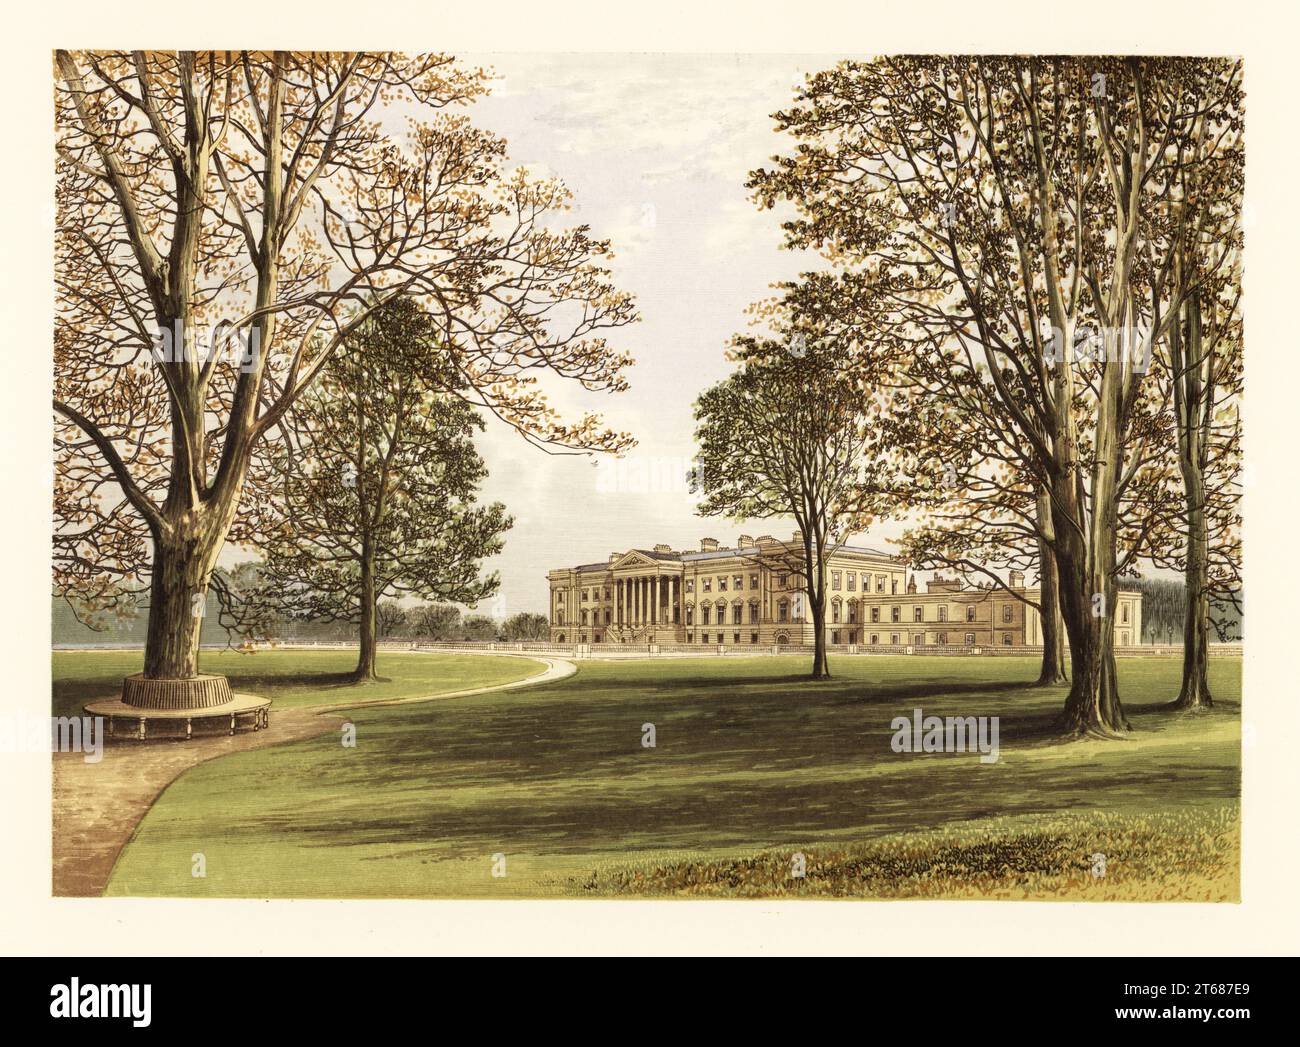 Hamilton Palace, Lanarkshire, Scotland. Neo-classical Palladian-style stately home with Corinthian pediment built by architect James Smith in 1695 for William Douglas-Hamilton, Duke of Hamilton, refurbished in the Regency era by David Hamilton from plans by WIlliam Adam. Colour woodblock by Benjamin Fawcett in the Baxter process of an illustration by Alexander Francis Lydon from Reverend Francis Orpen Morriss Picturesque Views of the Seats of Noblemen and Gentlemen of Great Britain and Ireland, William Mackenzie, London, 1880. Stock Photo